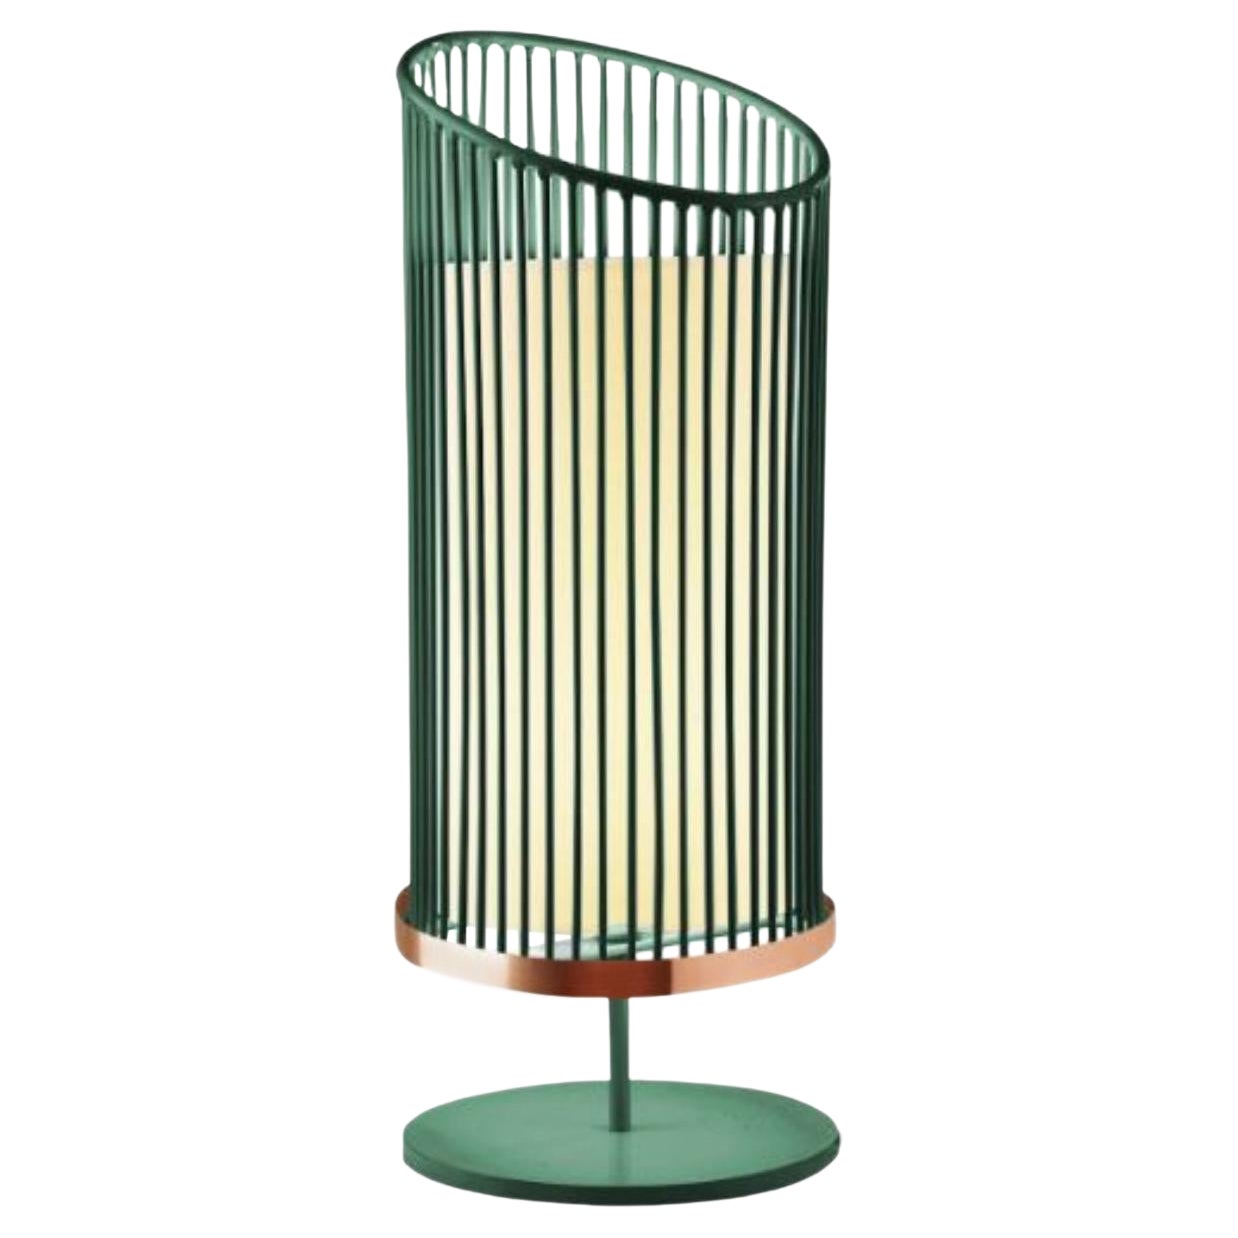 Moss New Spider Table Lamp with Copper Ring by Dooq